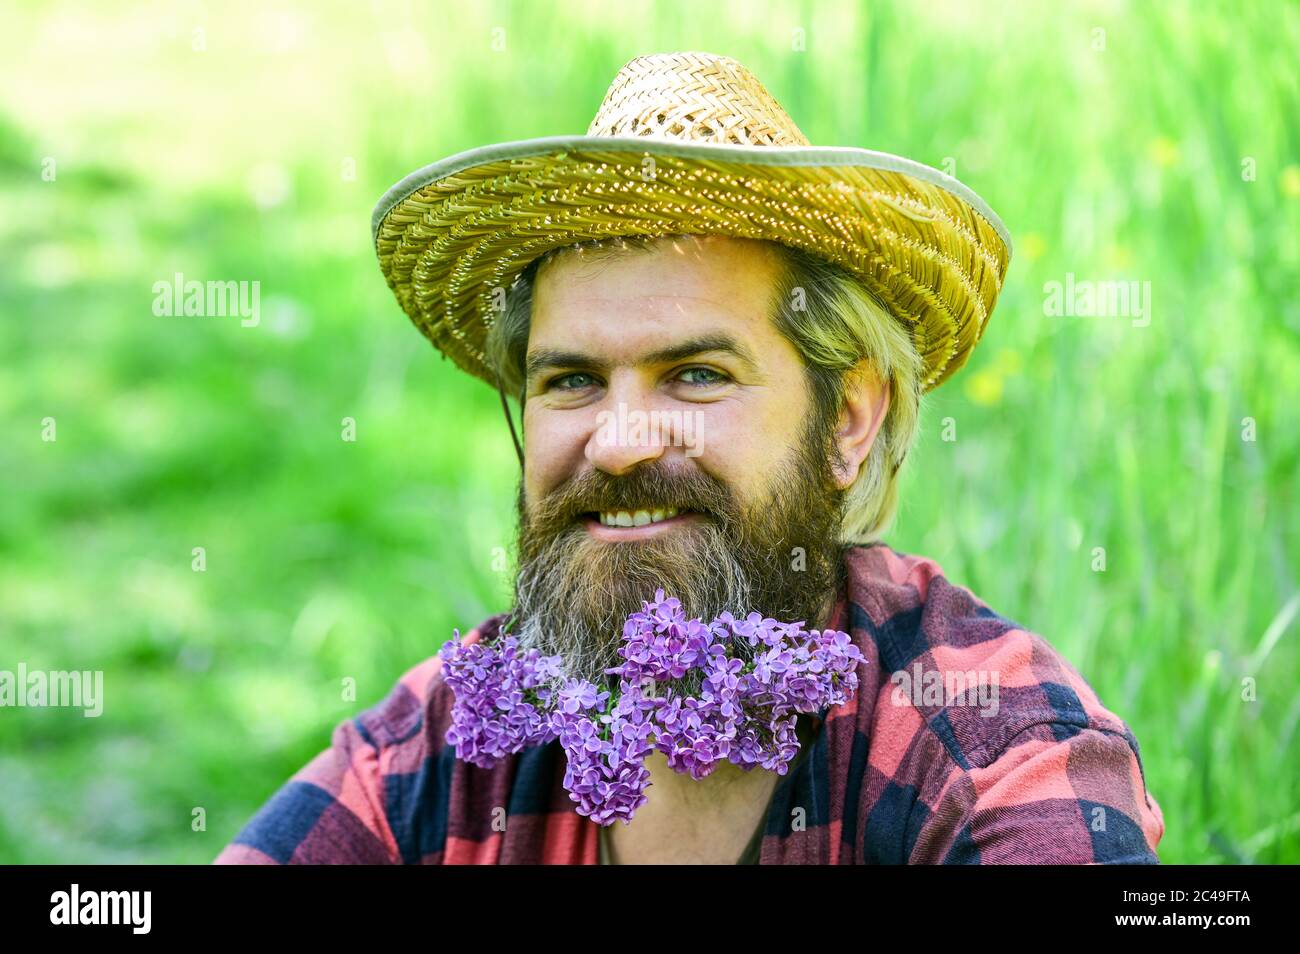 Rustic man with beard happy face enjoy life in ecological environment.  Hipster with lilac flowers looks happy. Bearded man with lilac in beard  green grass background. Eco friendly lifestyle concept Stock Photo 